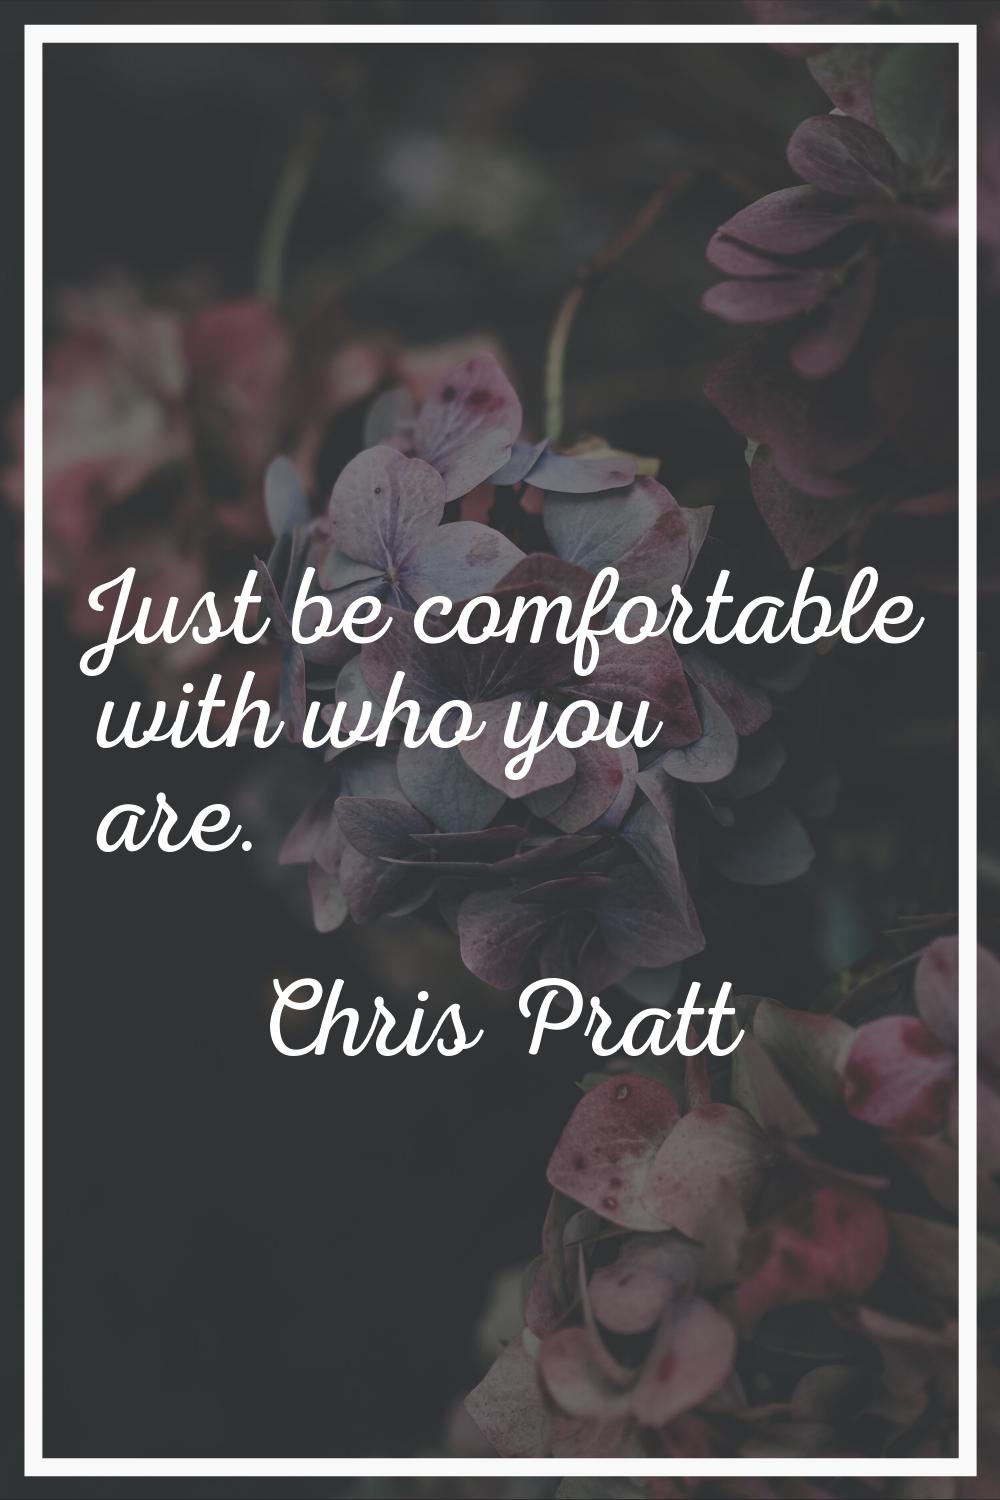 Just be comfortable with who you are.